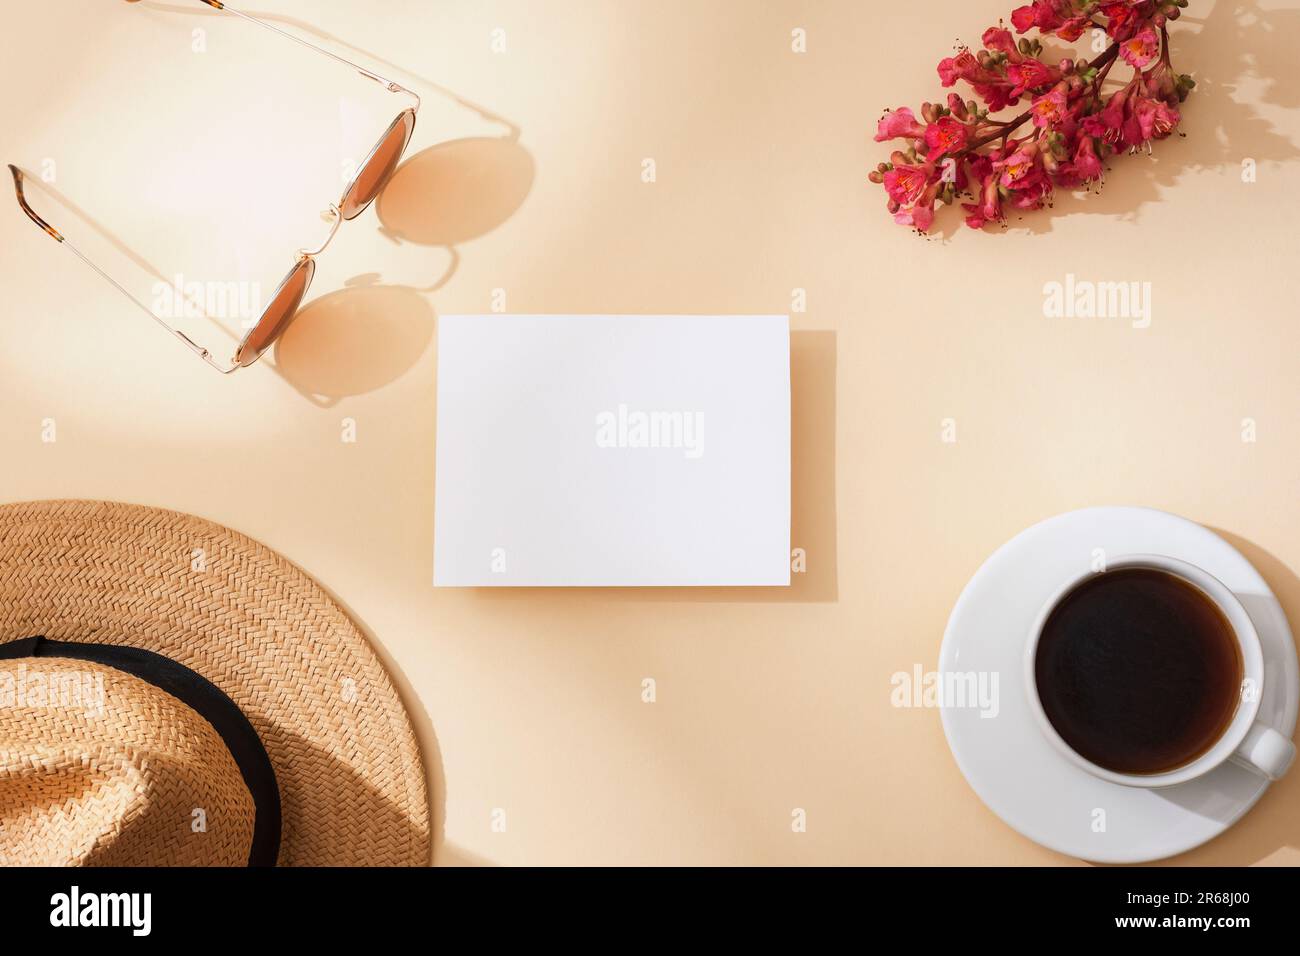 Blank card, coffee cup, straw hat, sunglasses and red flower. Top view, flat lay, mockup. Stock Photo